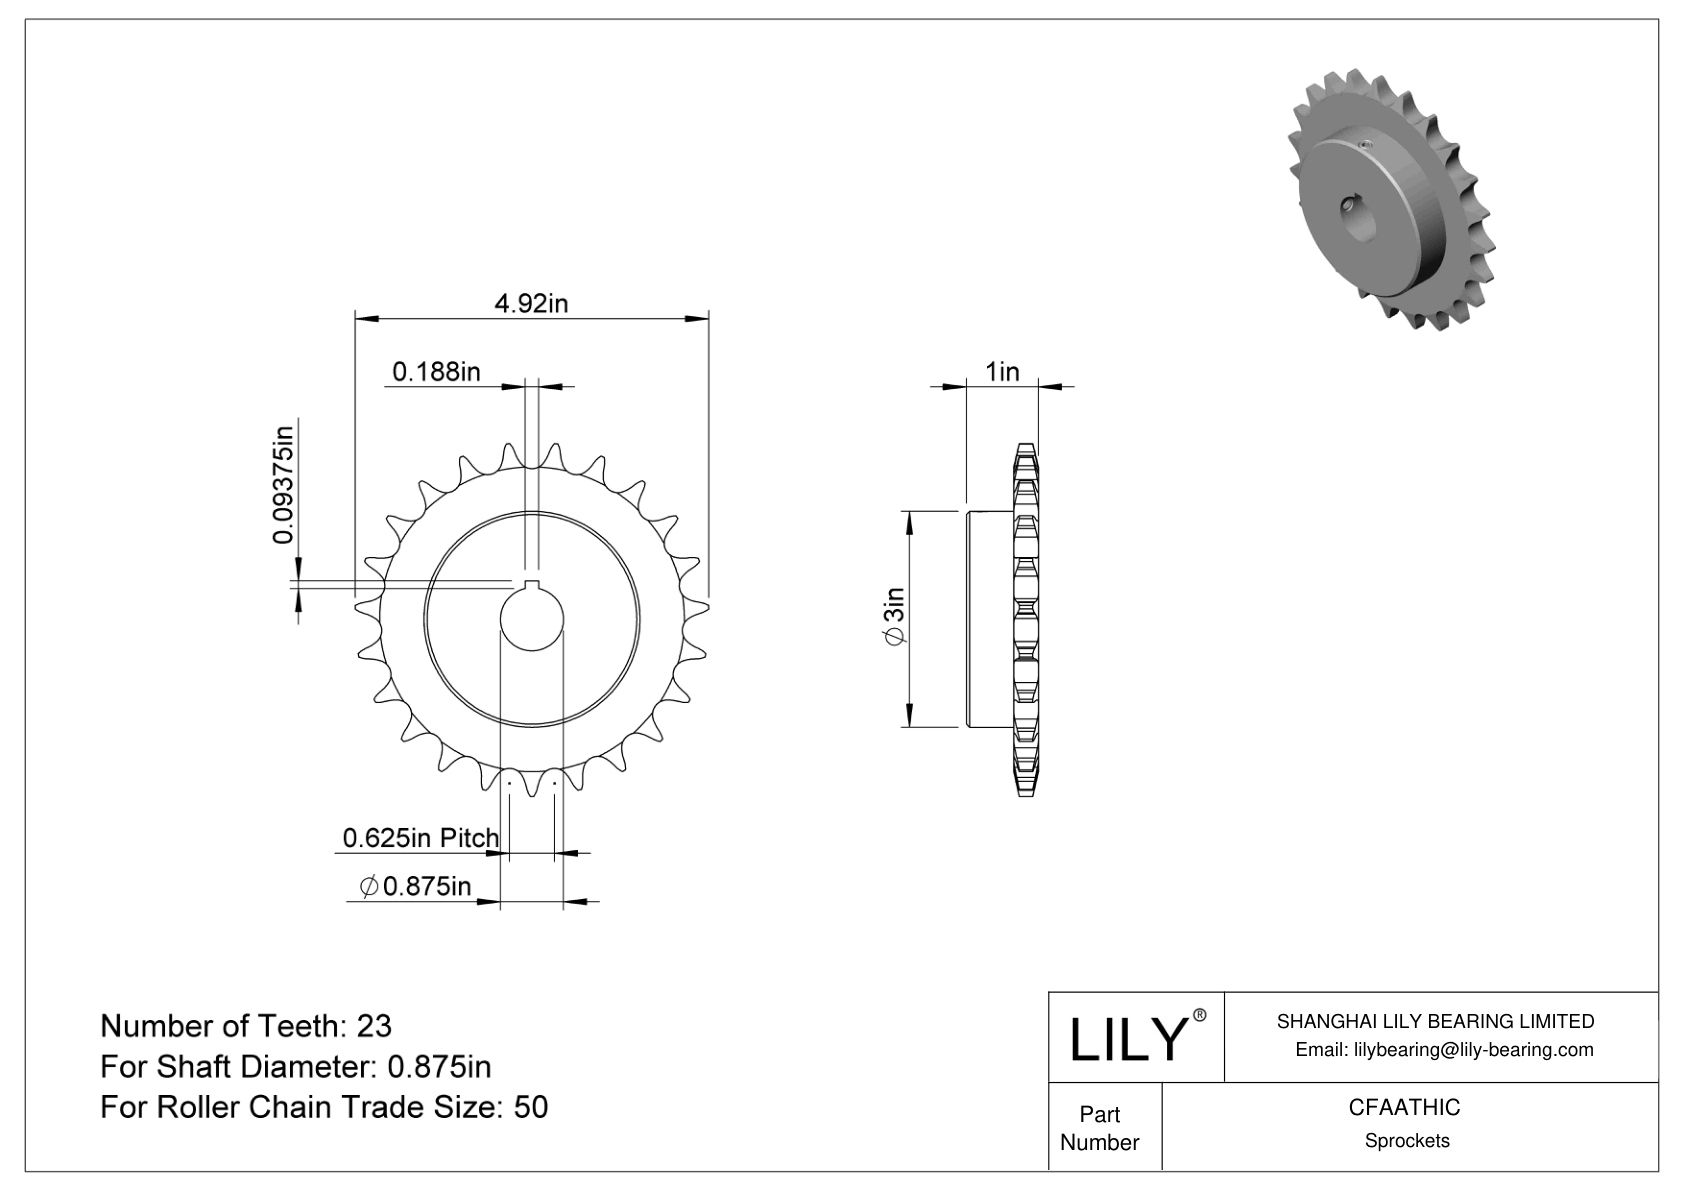 CFAATHIC Wear-Resistant Sprockets for ANSI Roller Chain cad drawing